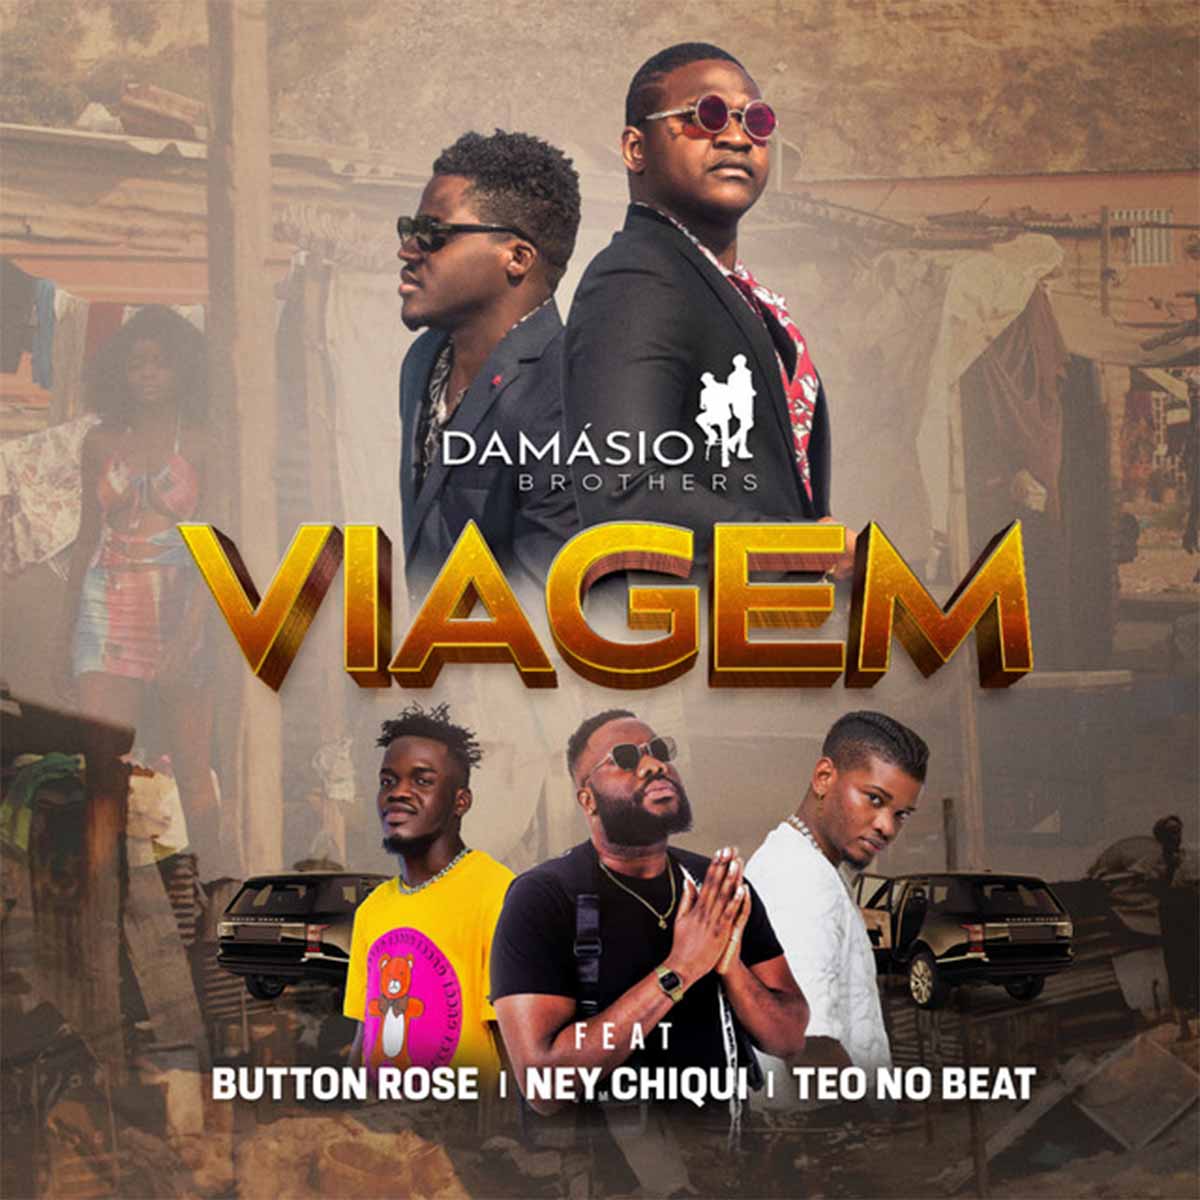 Damásio Brothers – Viagem (feat. Button Rose, Ney Chiqui & Teo No Beat)